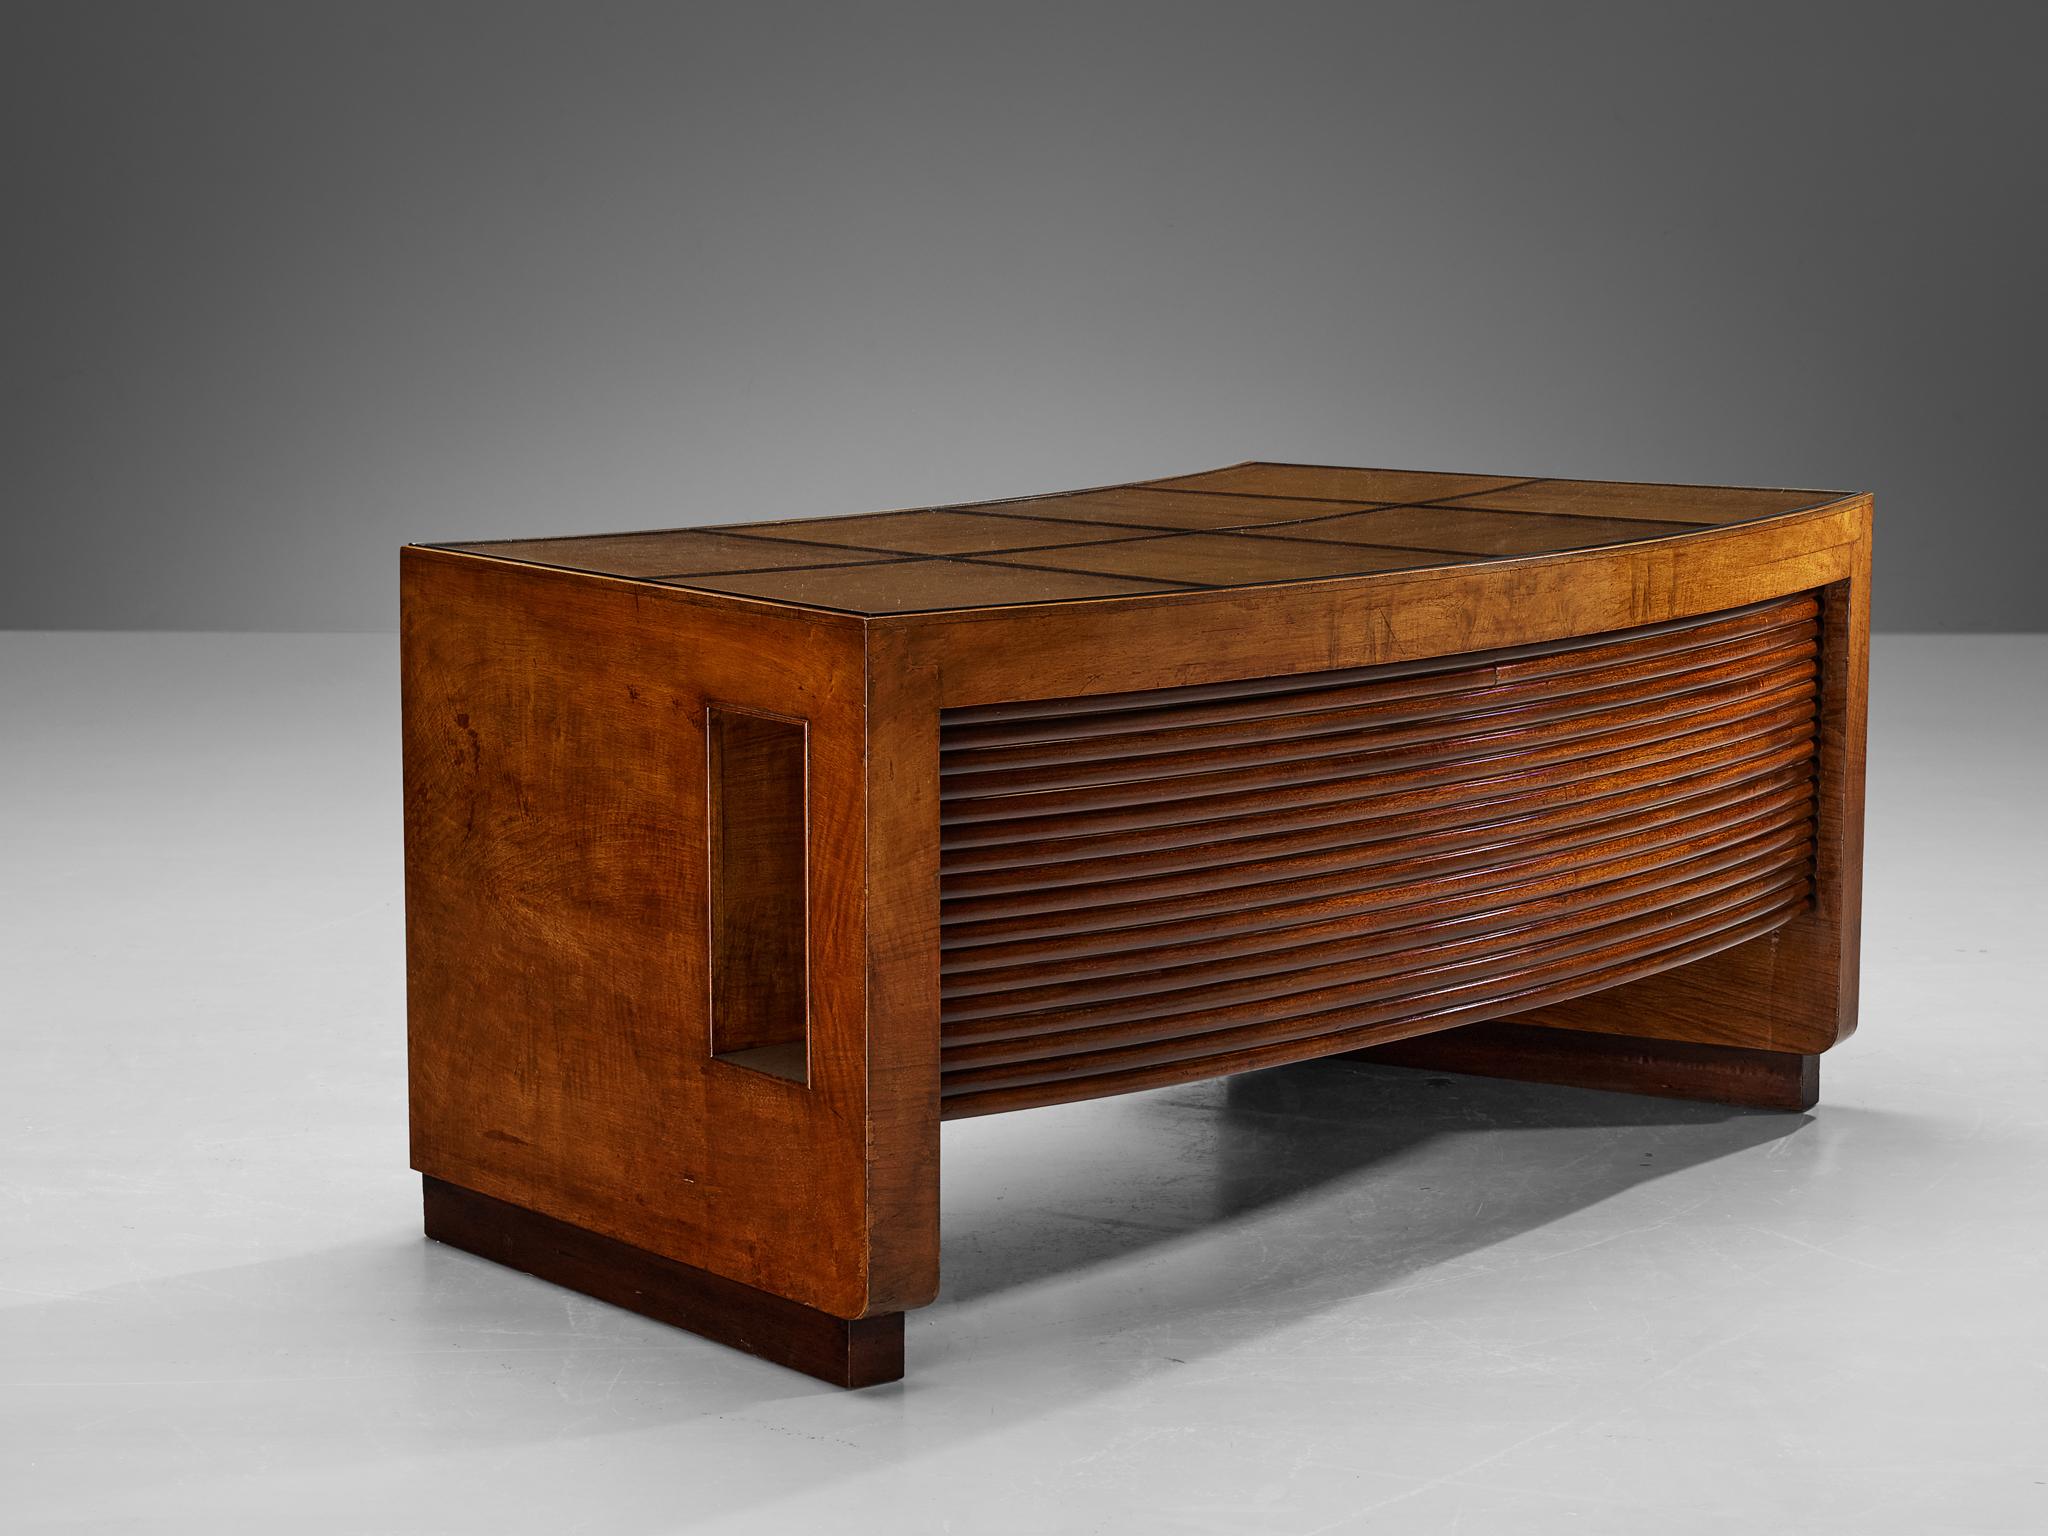 Gio Ponti, writing desk, walnut, mahogany, glass, Italy, 1940s

This writing table, a rare find designed by Gio Ponti, originates from the 1940s. The design is truly magnificent, featuring a crescent-shaped framework executed with a defined